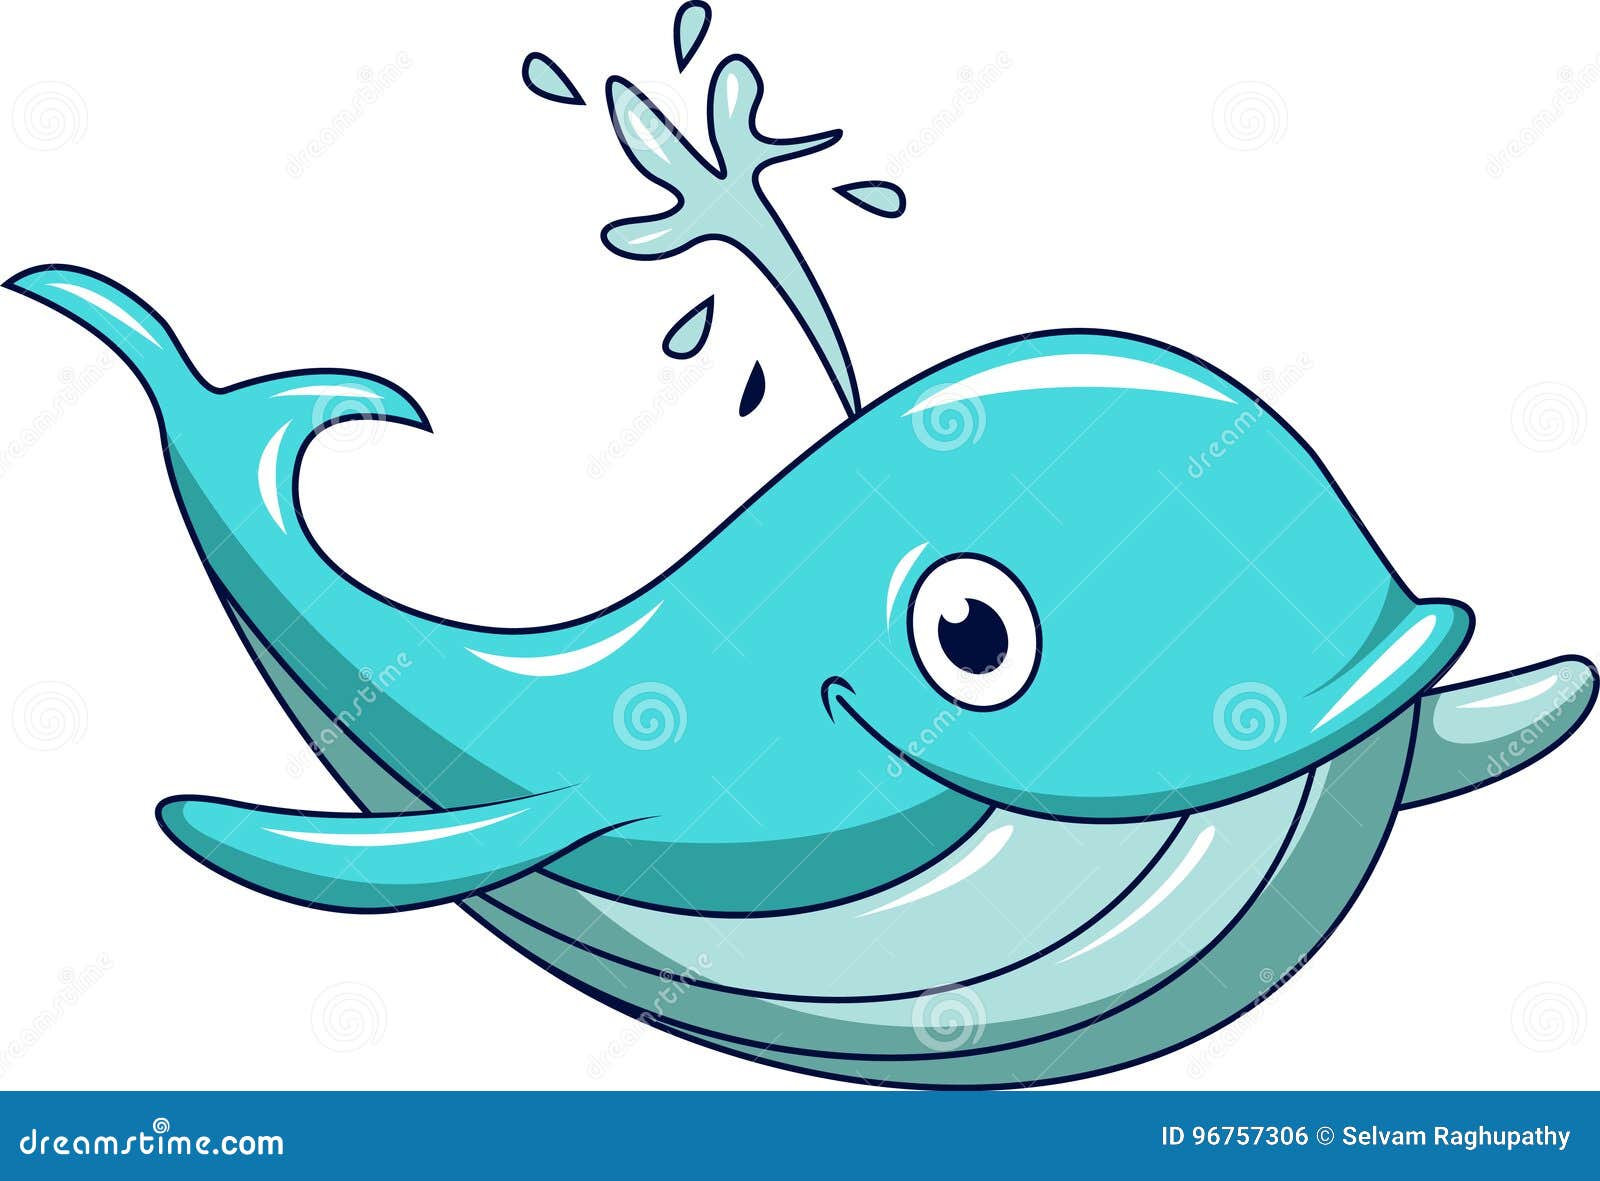 Funny smiling wale stock vector. Illustration of isolated - 96757306